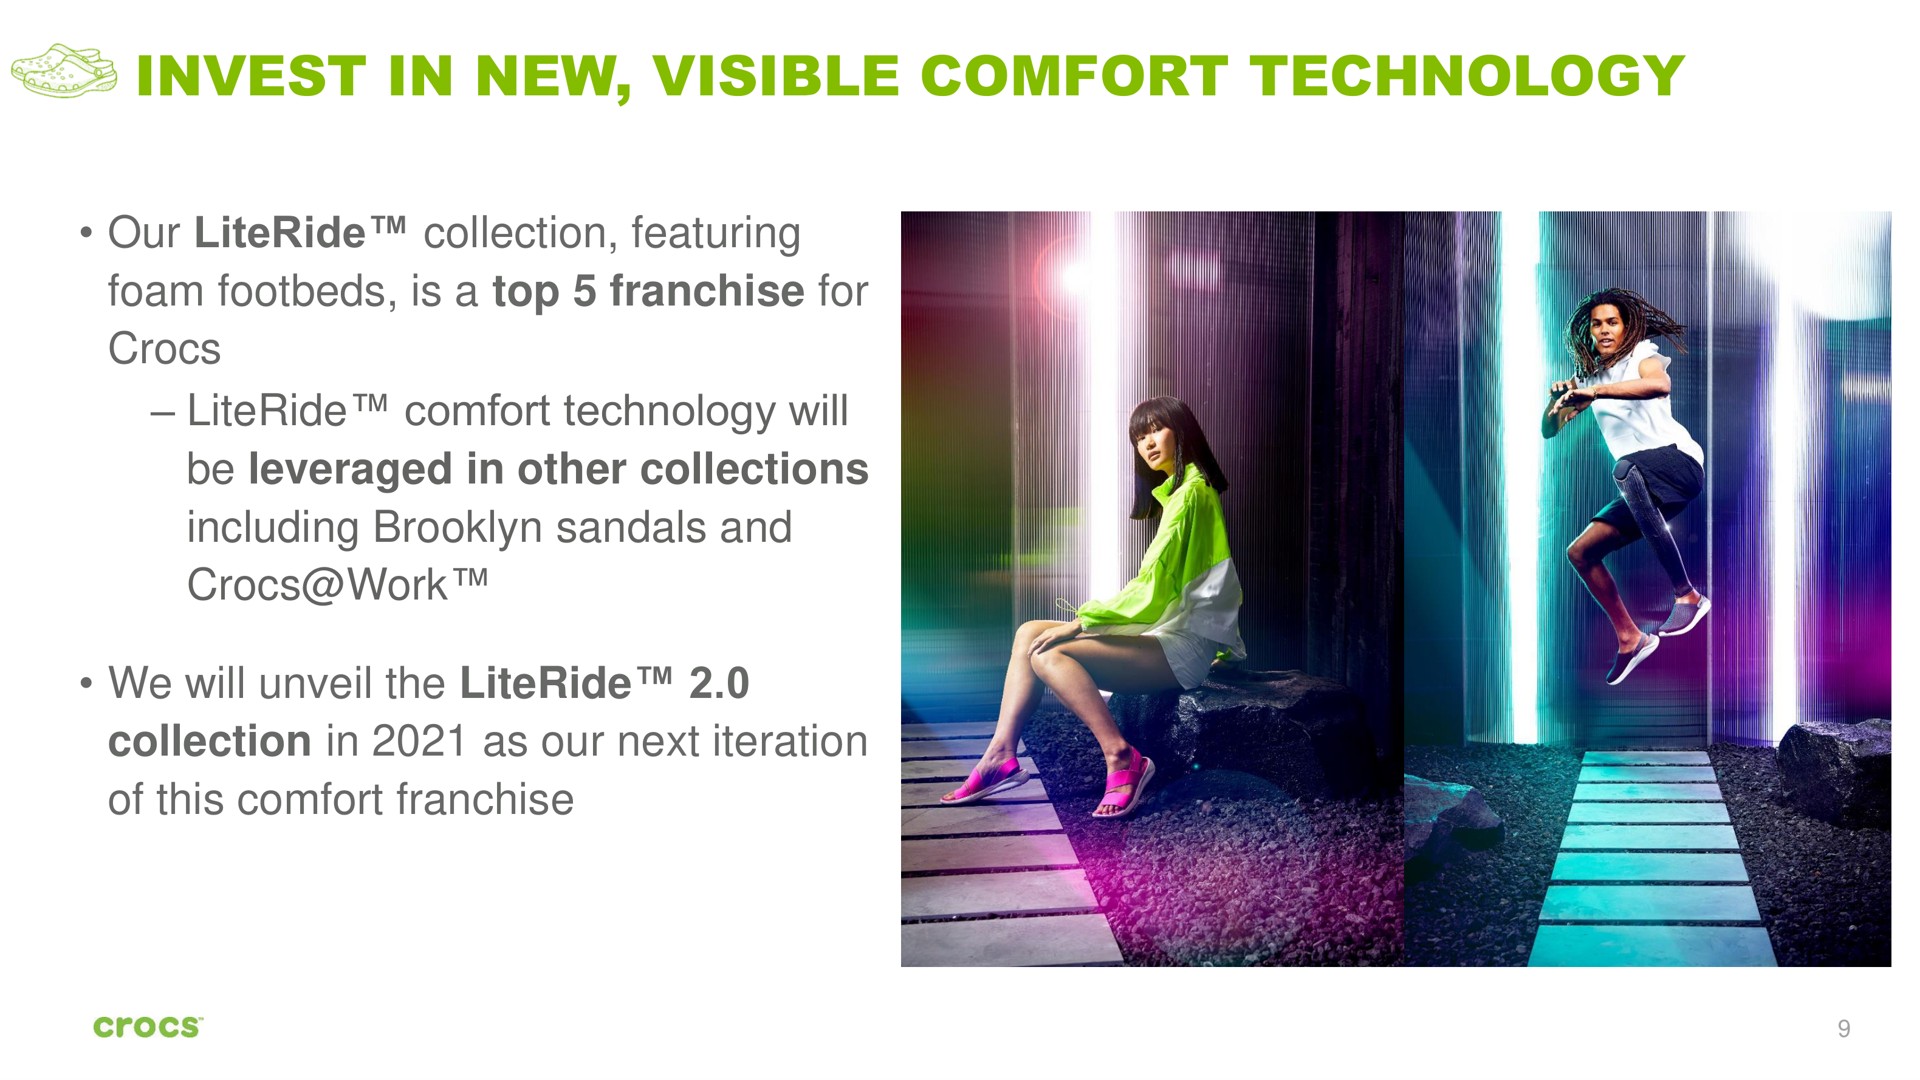 invest in new visible comfort technology i i i be leveraged other collections including sandals and work | Crocs